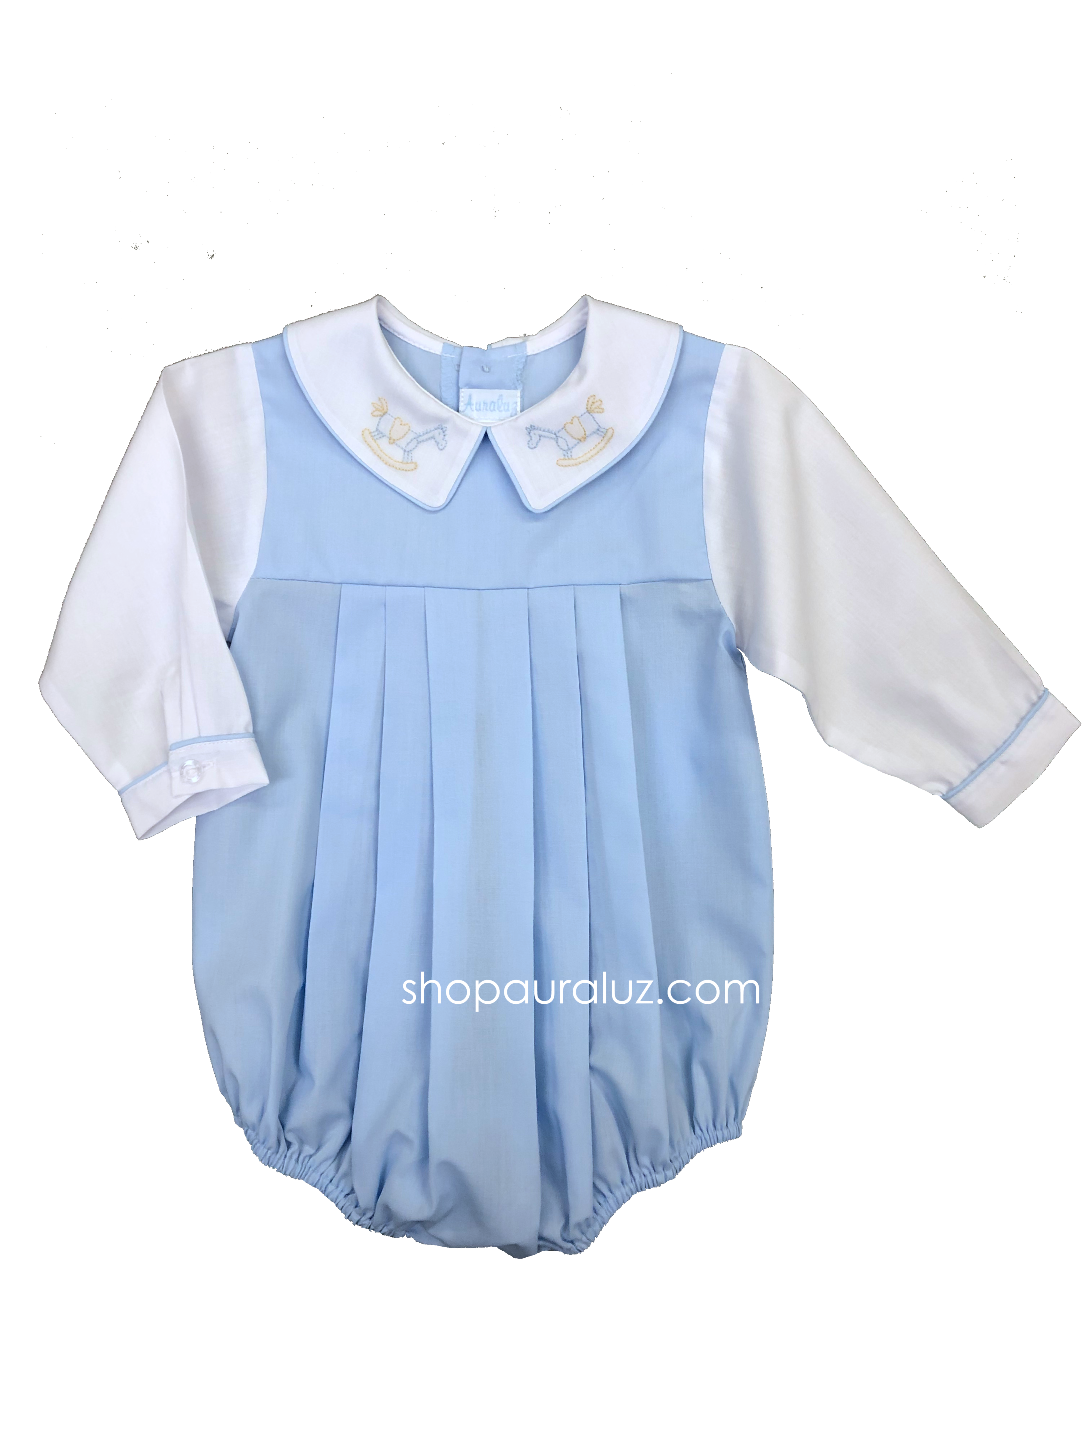 Auraluz Boy Bubble...Blue w/white long sleeves and boy collar with embroidered rocking horses